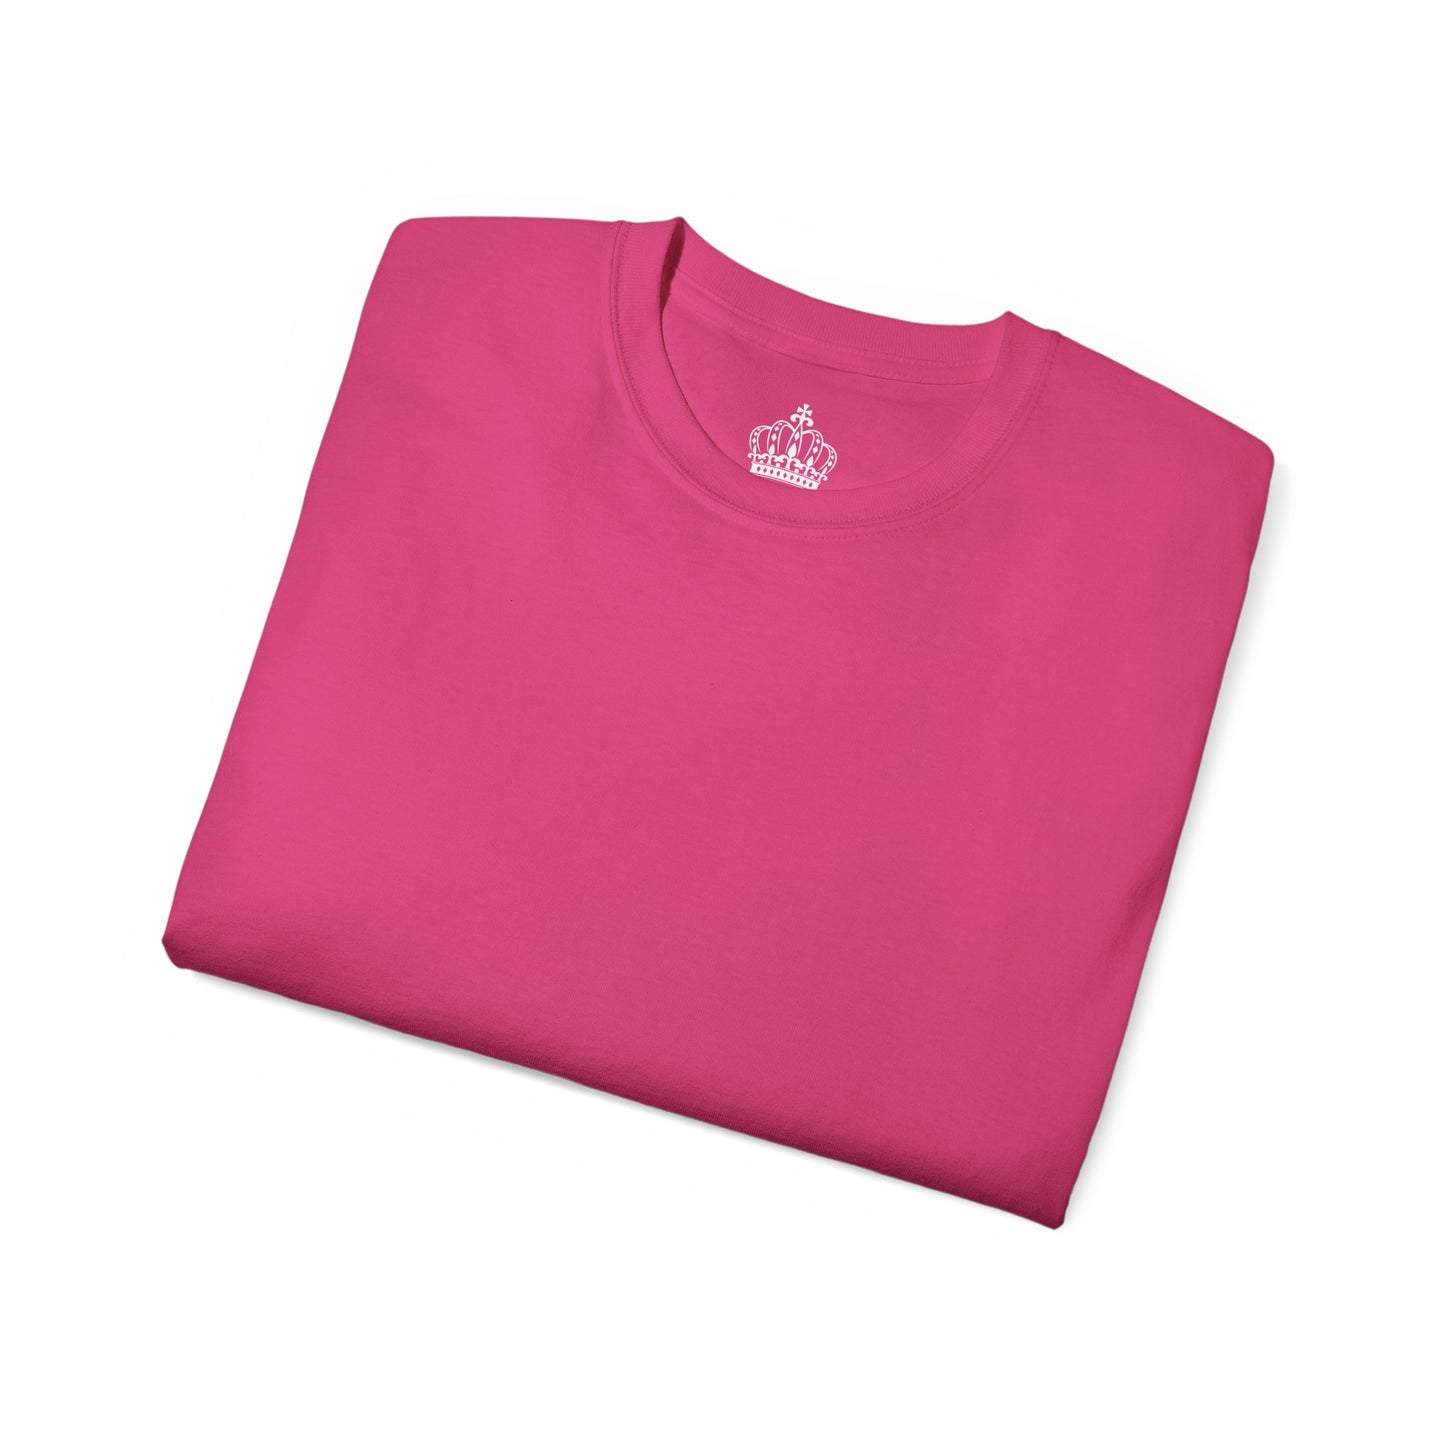 Heliconia Pink Unisex Ultra Cotton Tee